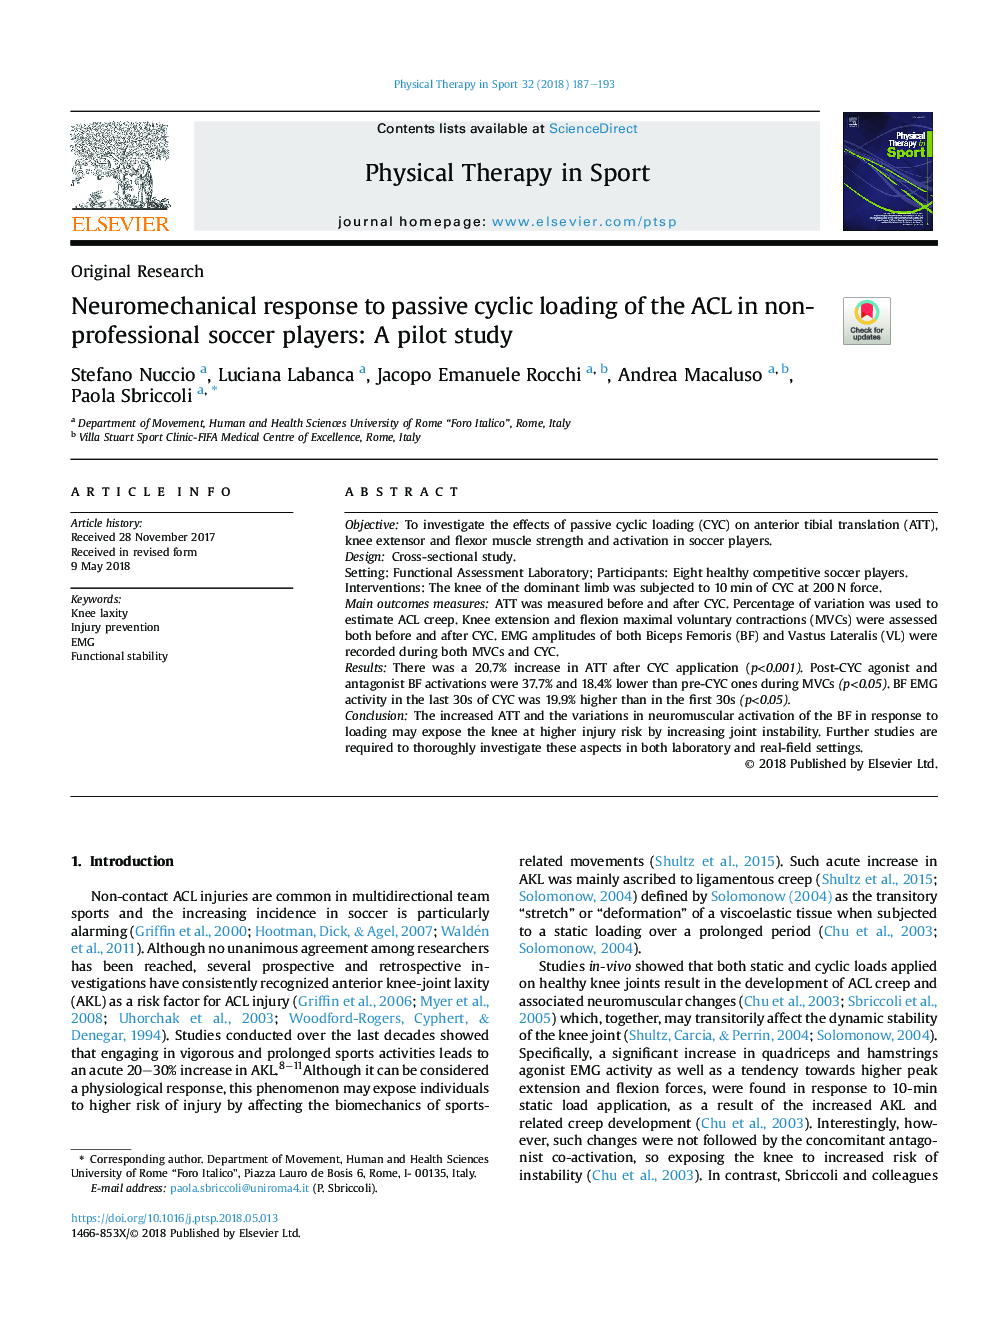 Neuromechanical response to passive cyclic loading of the ACL in non-professional soccer players: A pilot study